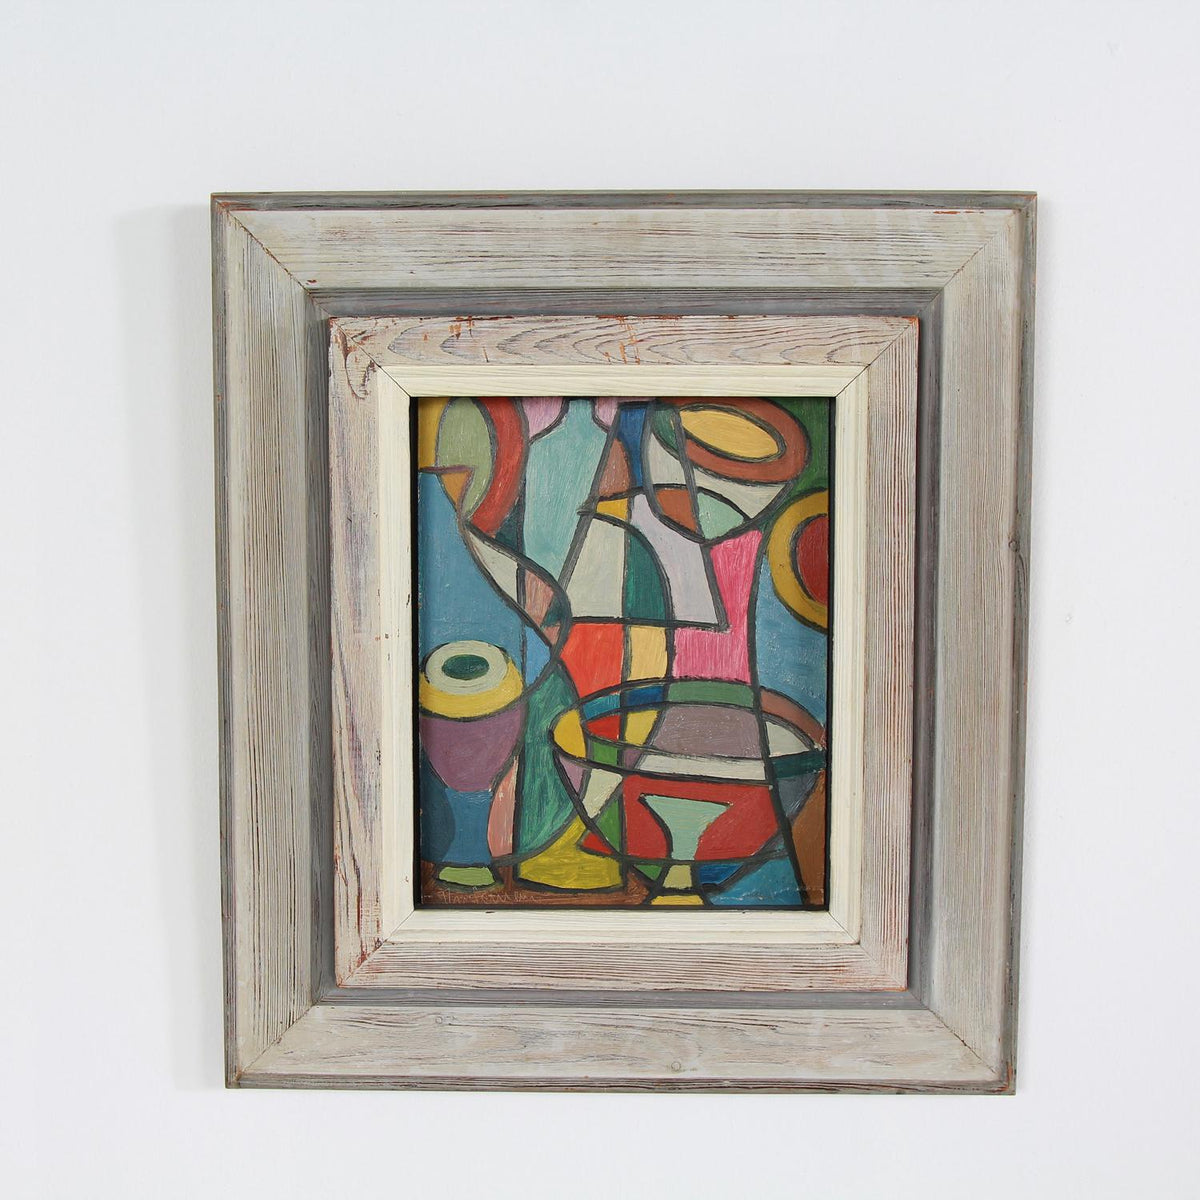 Cubist Swedish Abstract Oil on Board in Frame Signed Erik Thiderman